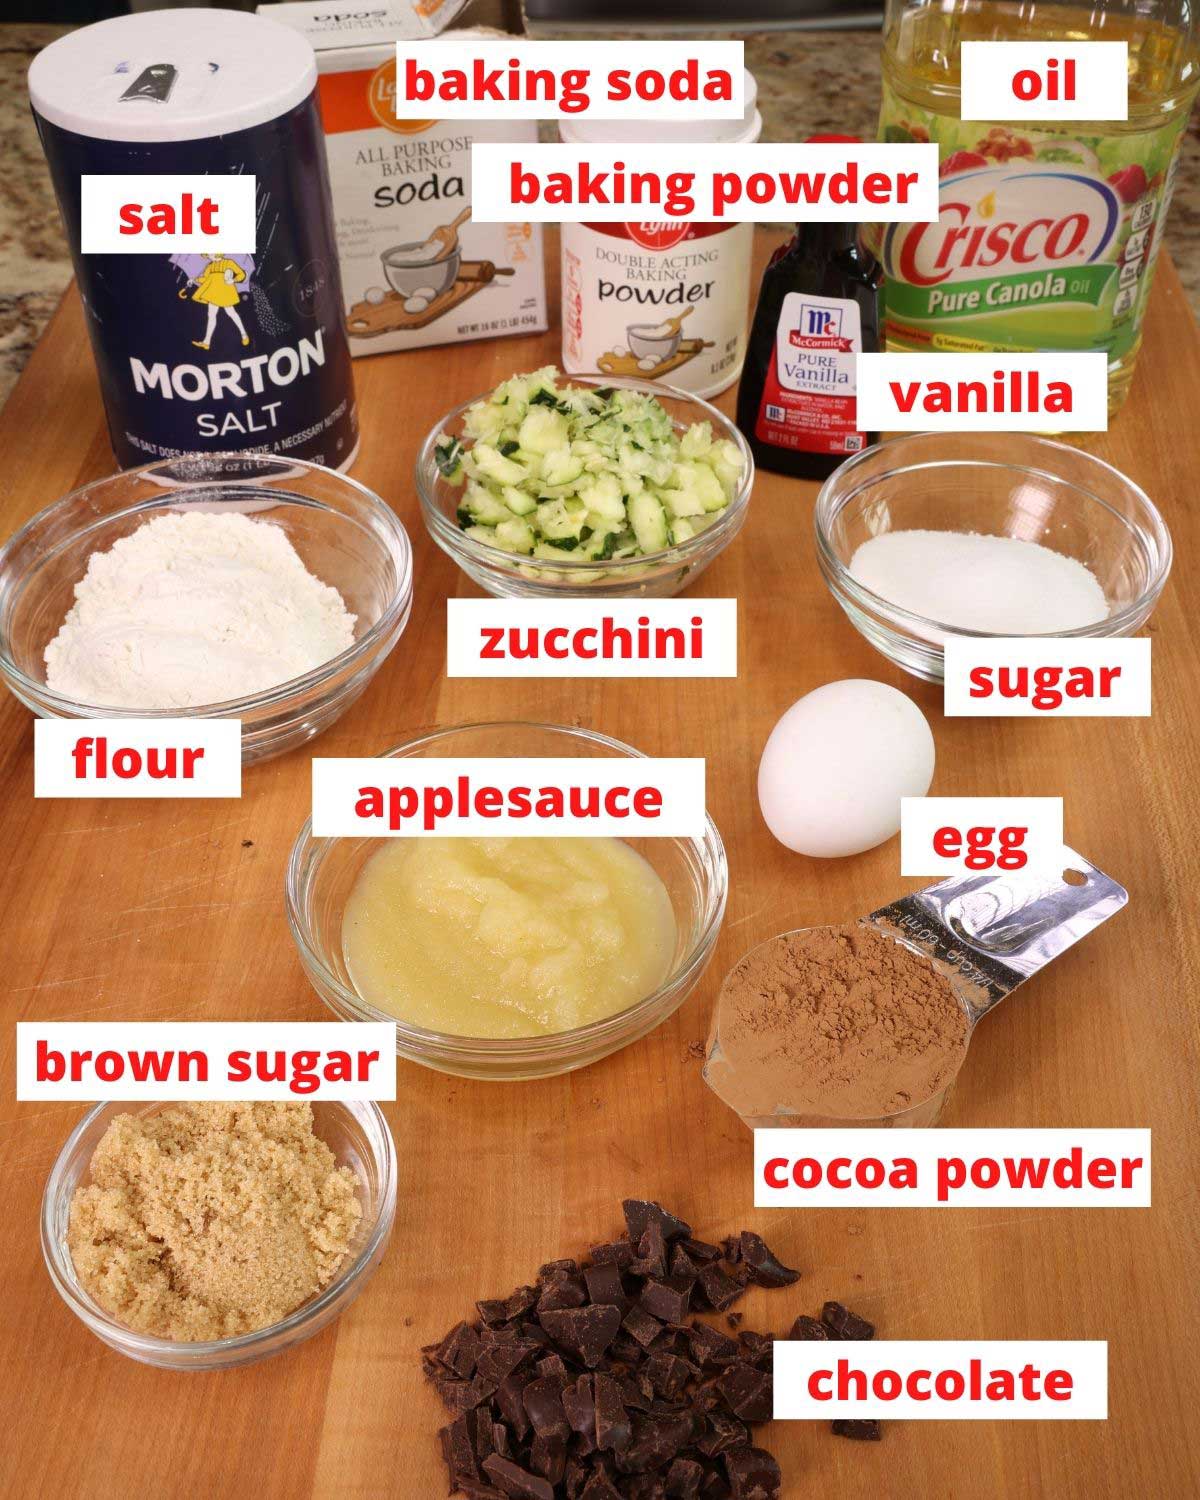 ingredients needed to make chocolate zucchini bread on a wooden cutting board in a kitchen.